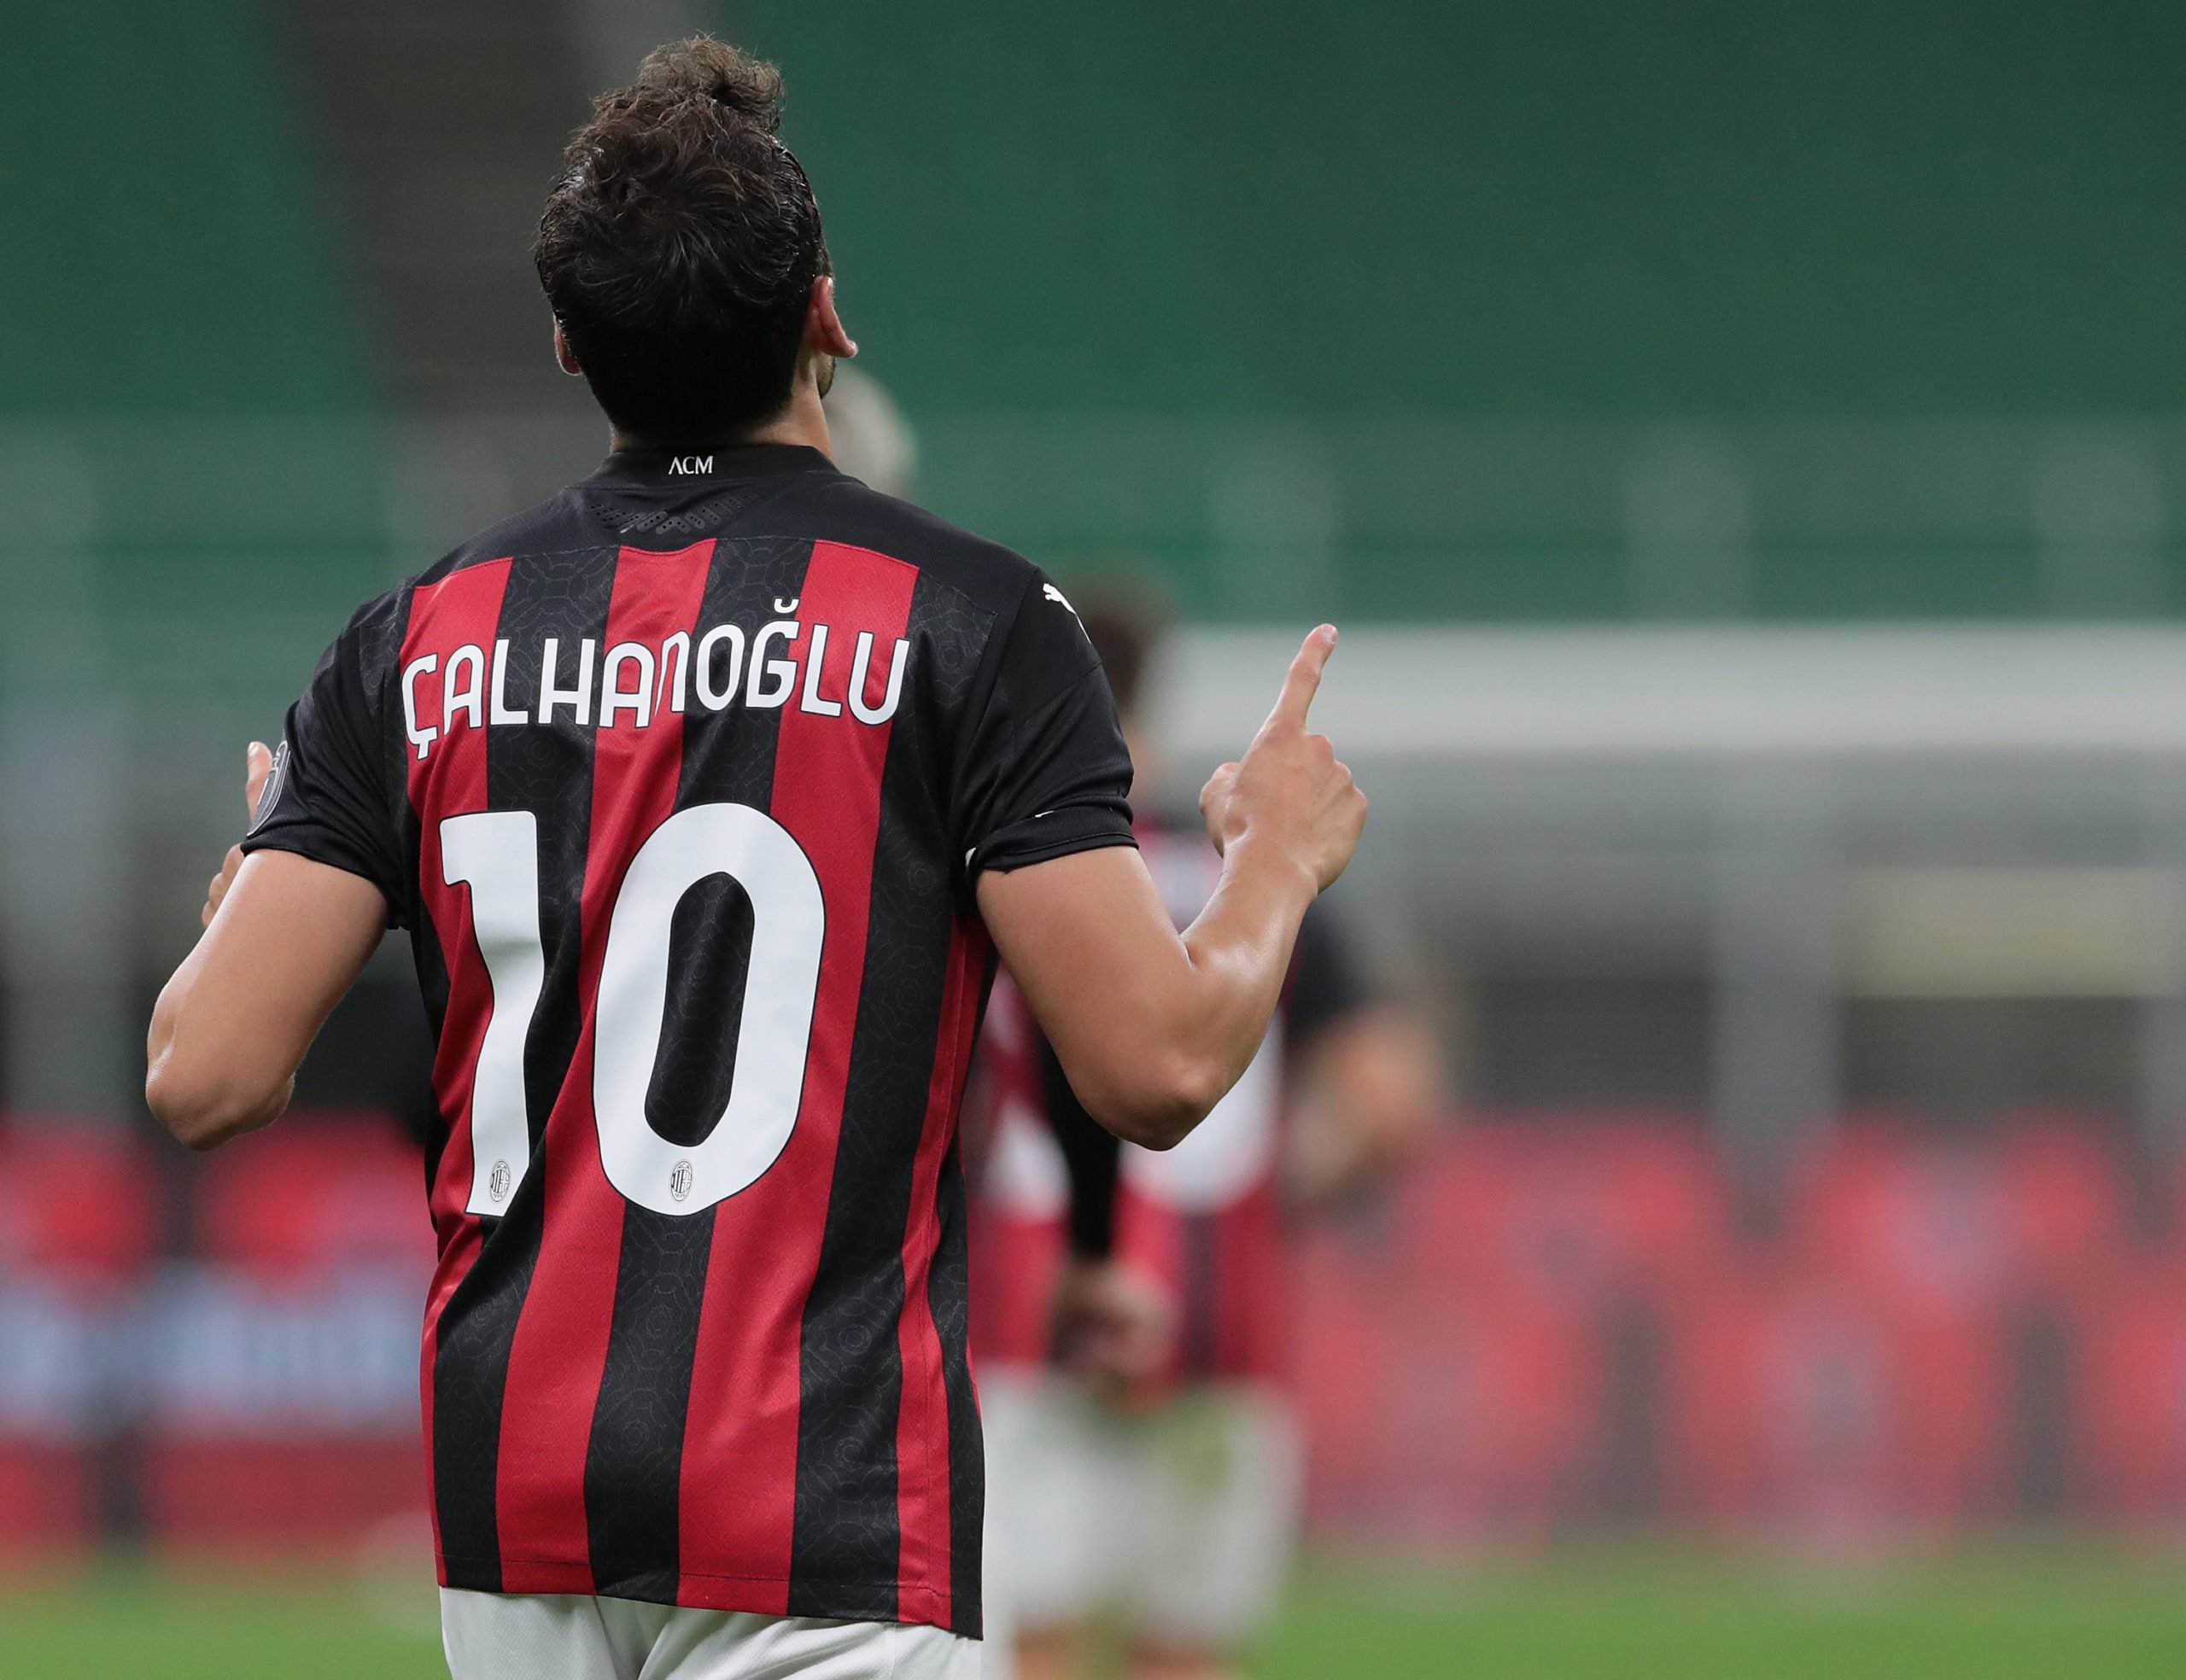 Report: Hakan Calhanoglu to be out for 10 days; back well in time for Celtic return fixture